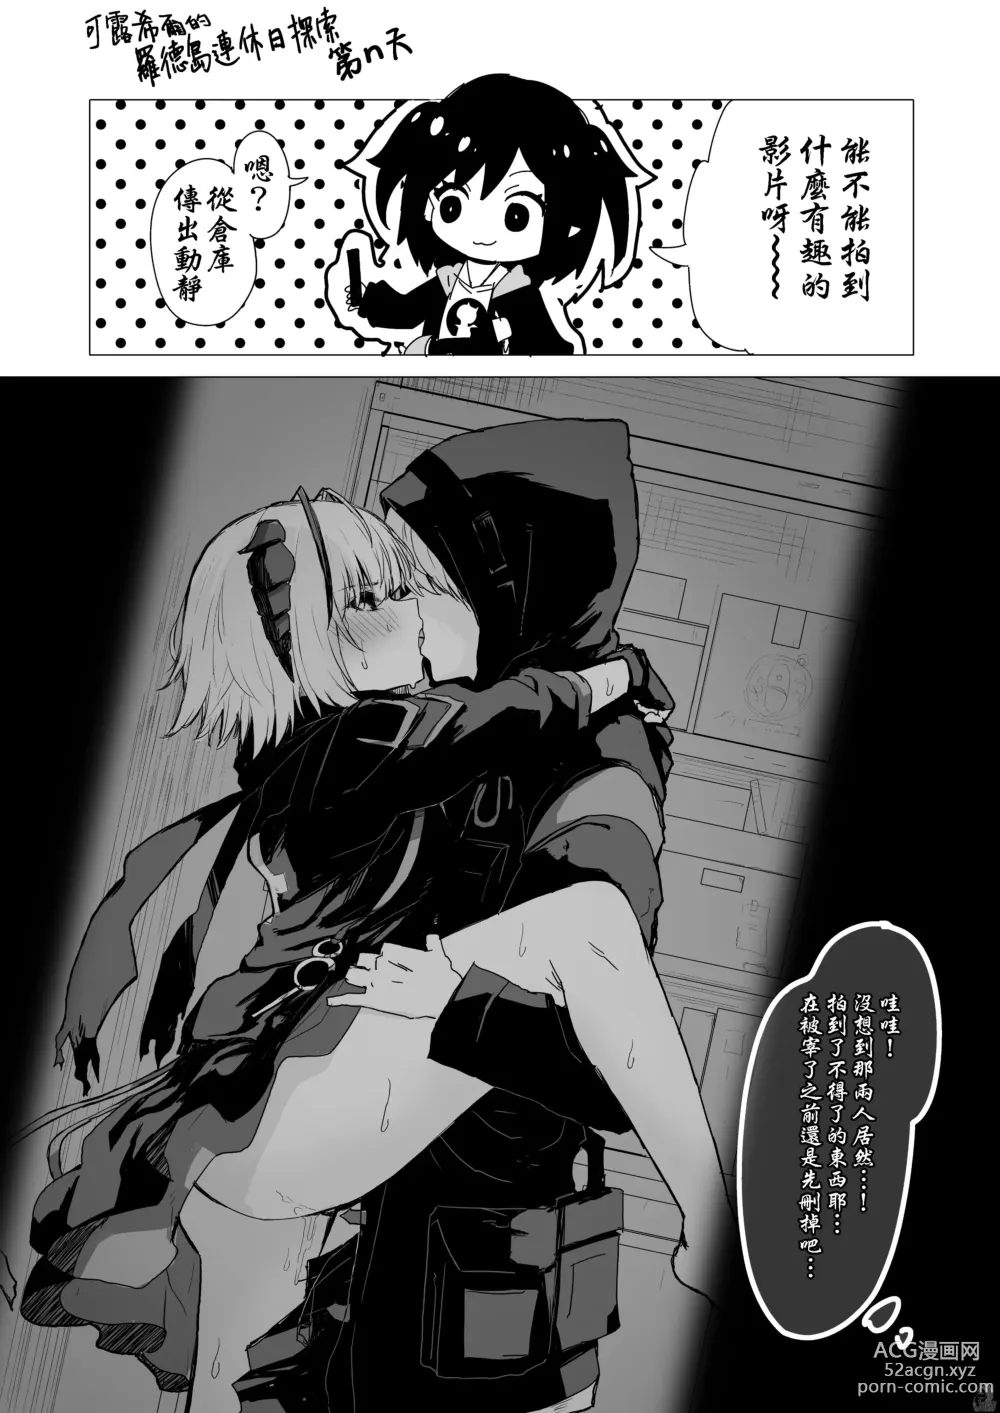 Page 6 of doujinshi Twitter collection